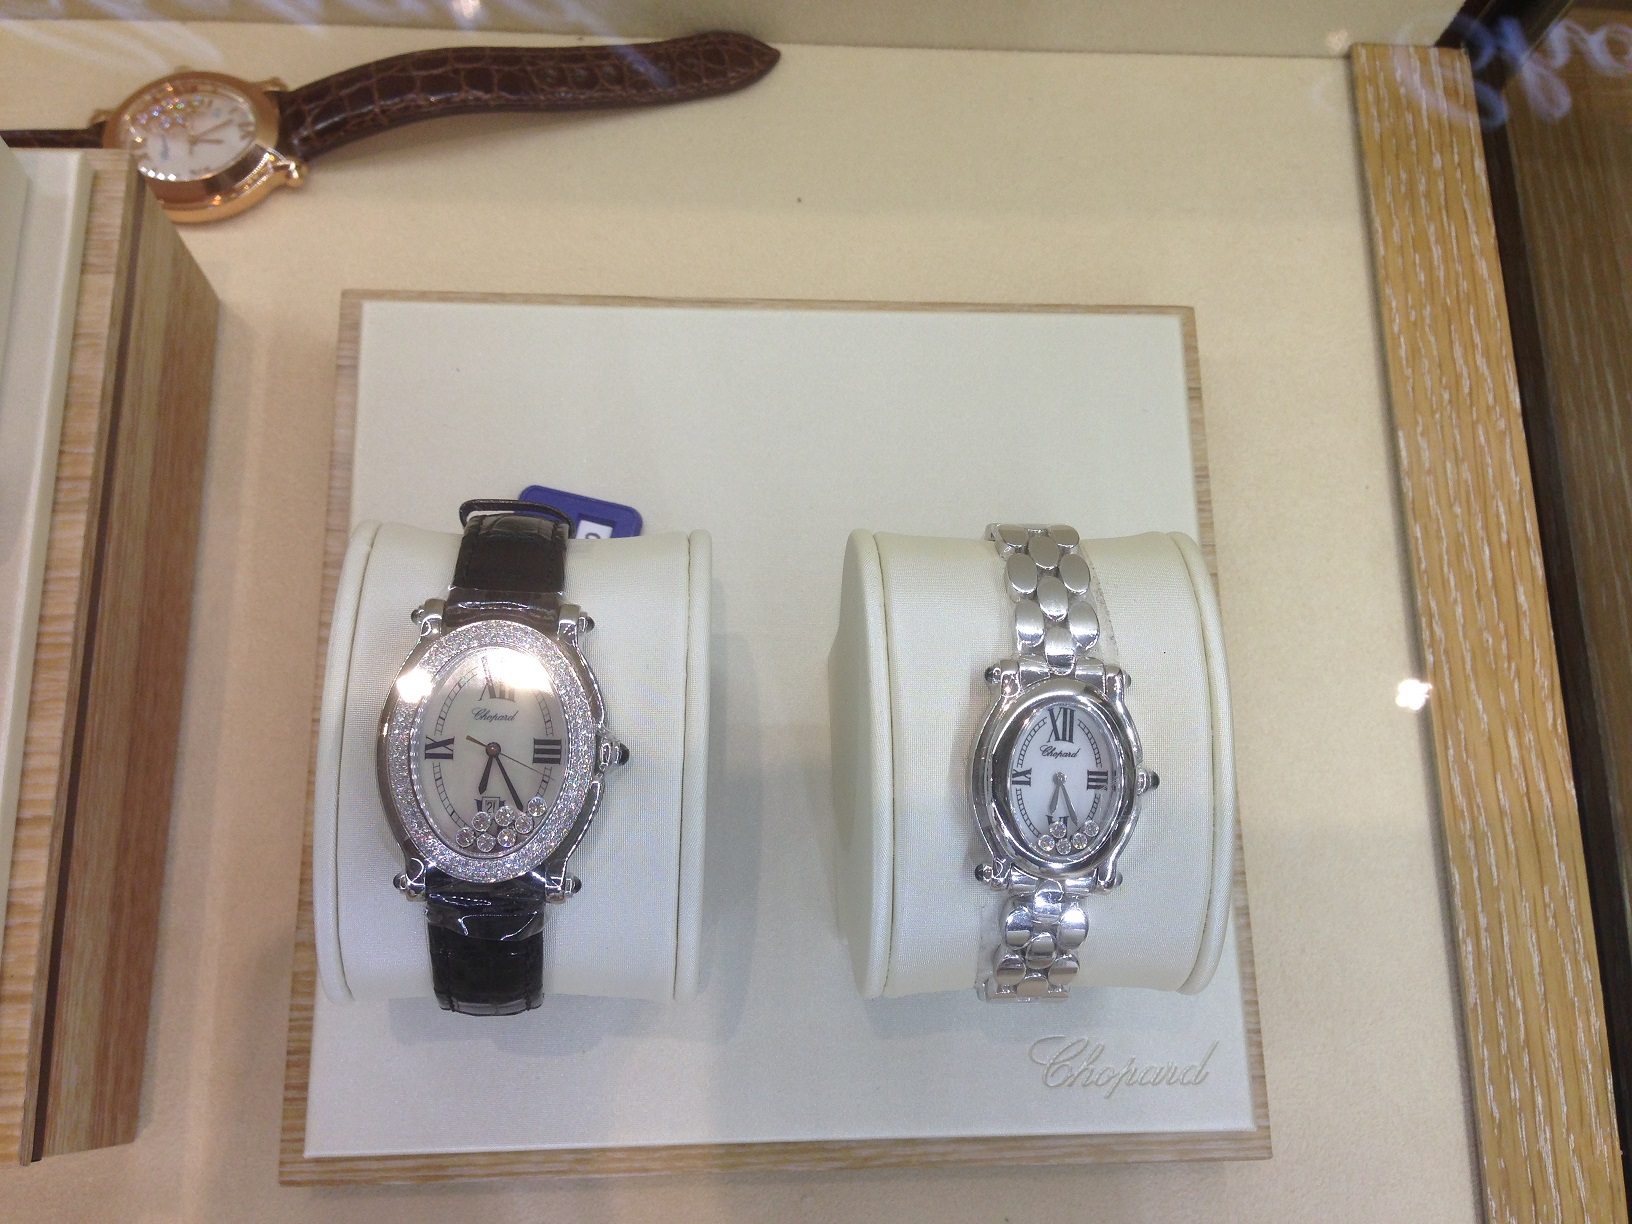 Chopard stainless steel watches